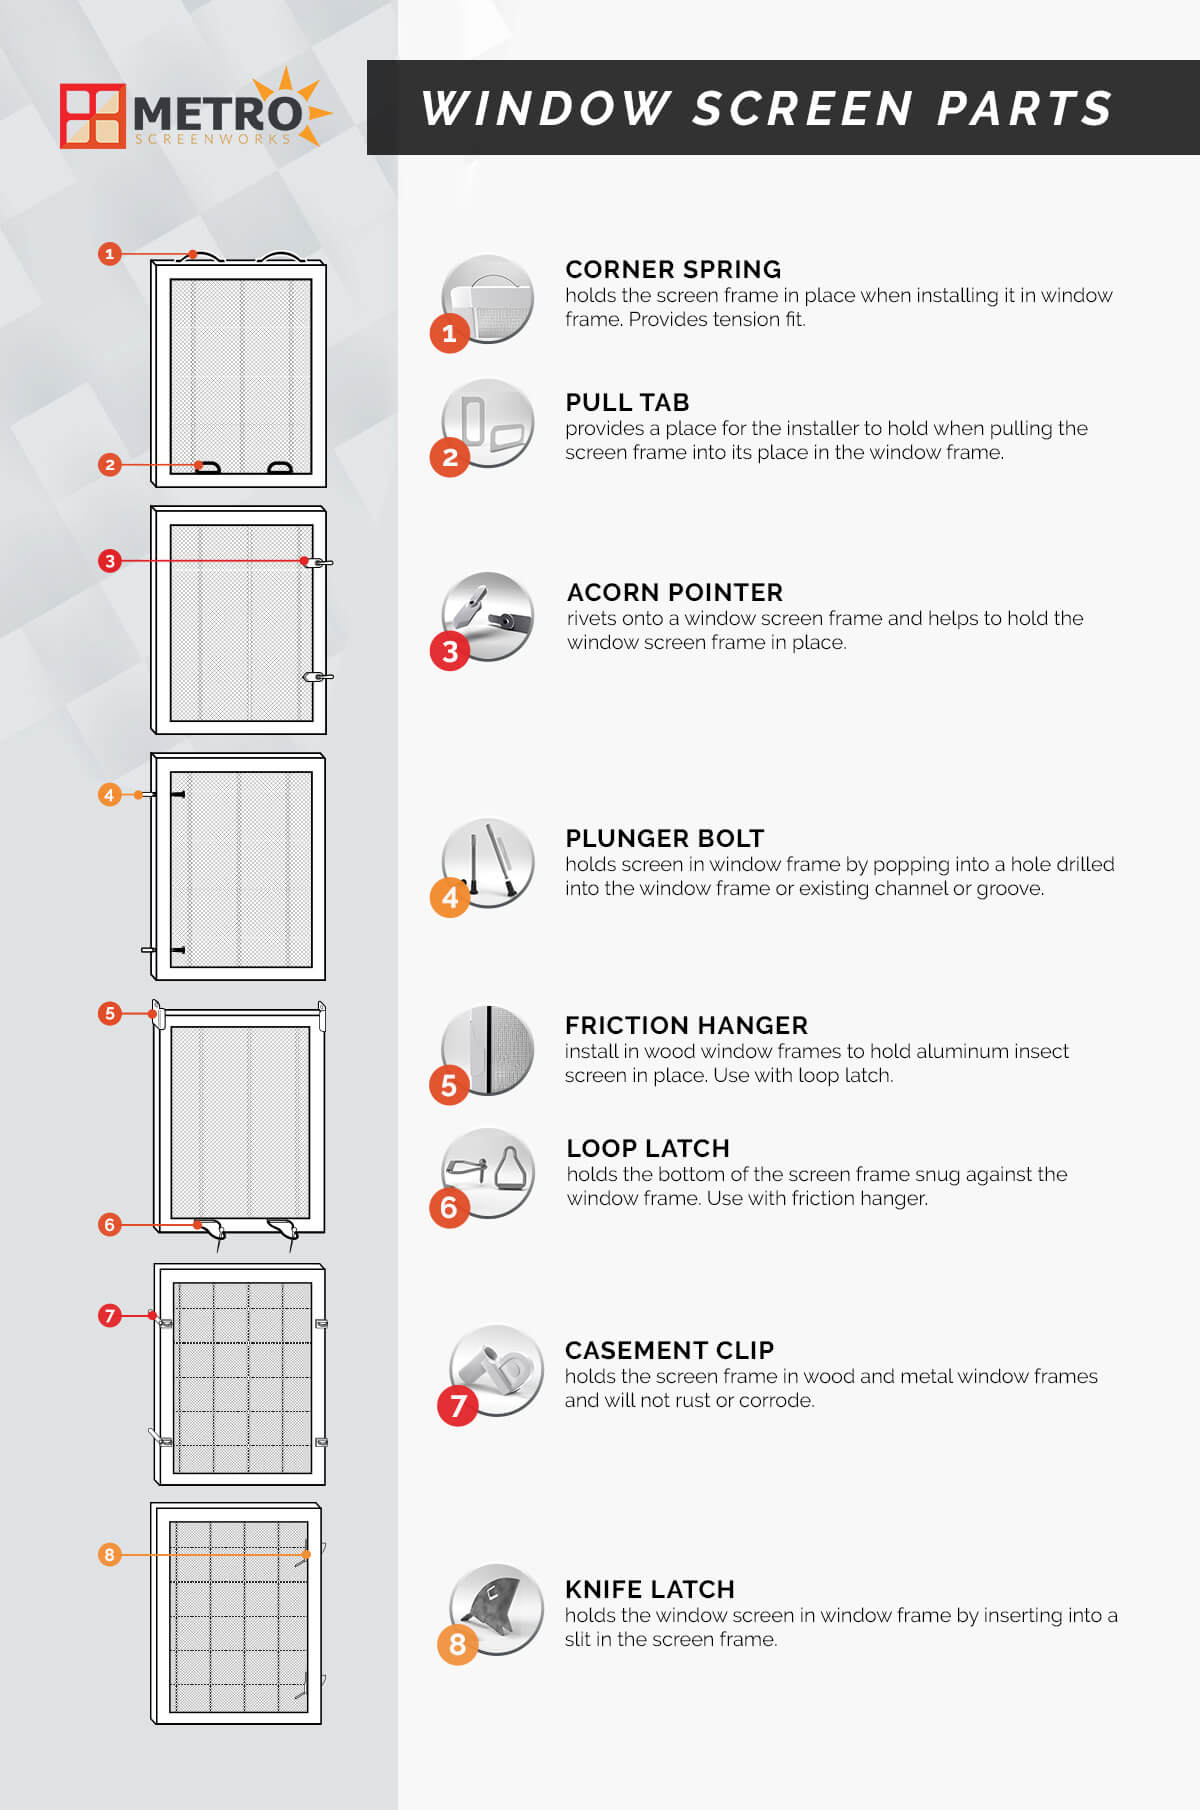 Window Screen Parts infographic